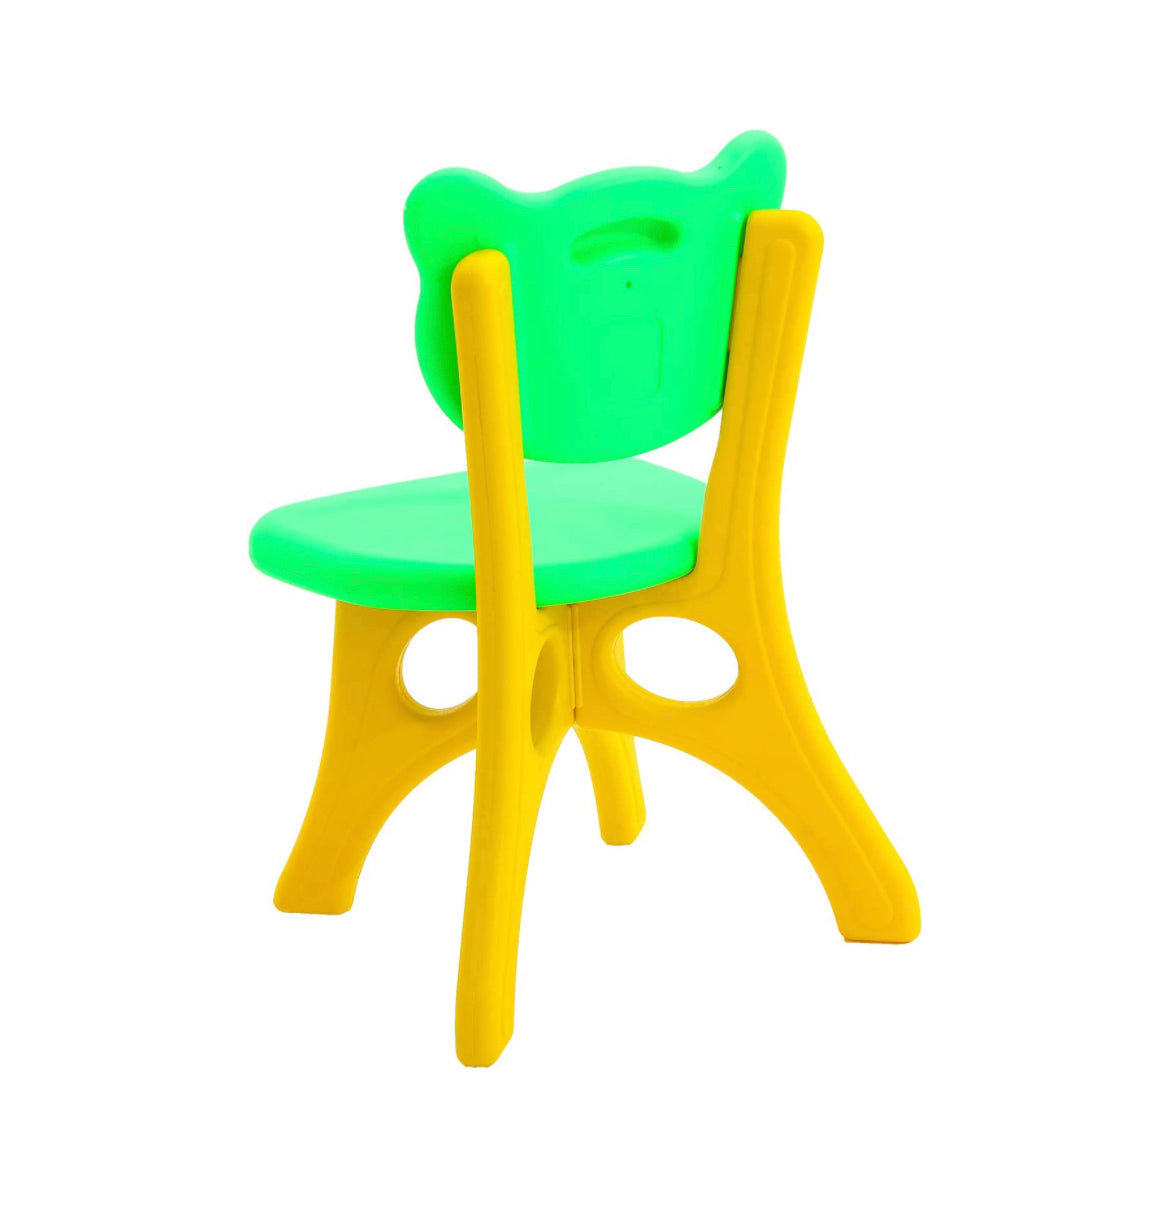 Strong & Durable Chair for Kids (Green) - The Minikin Store